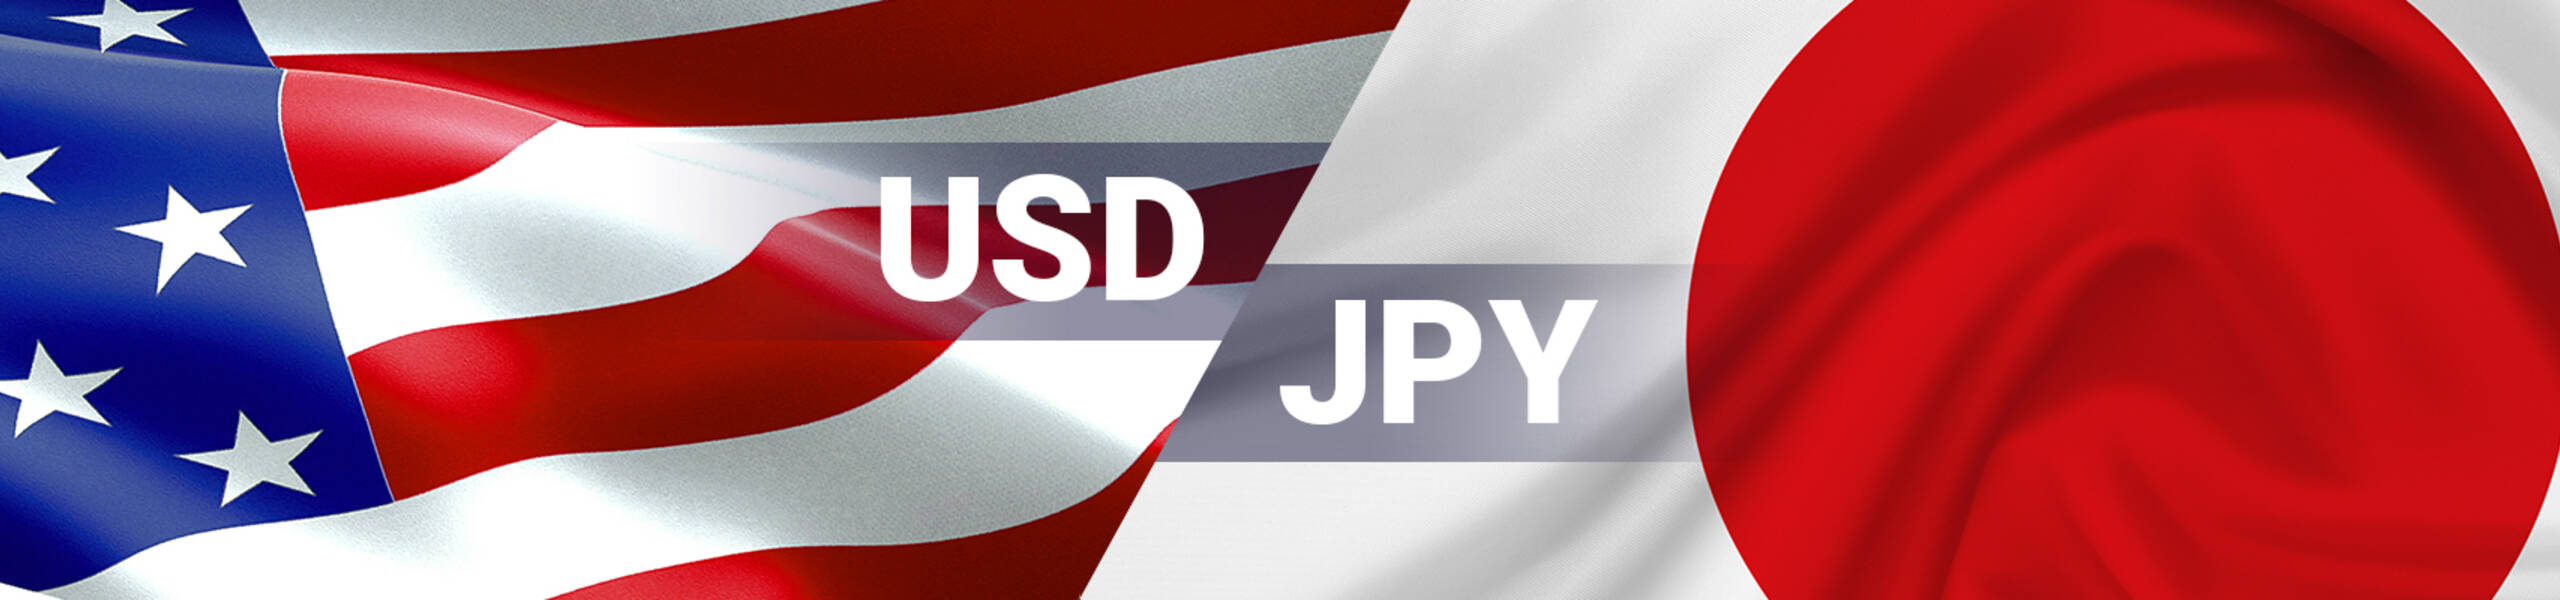 USD/JPY Dailyレポート 2017/09/22